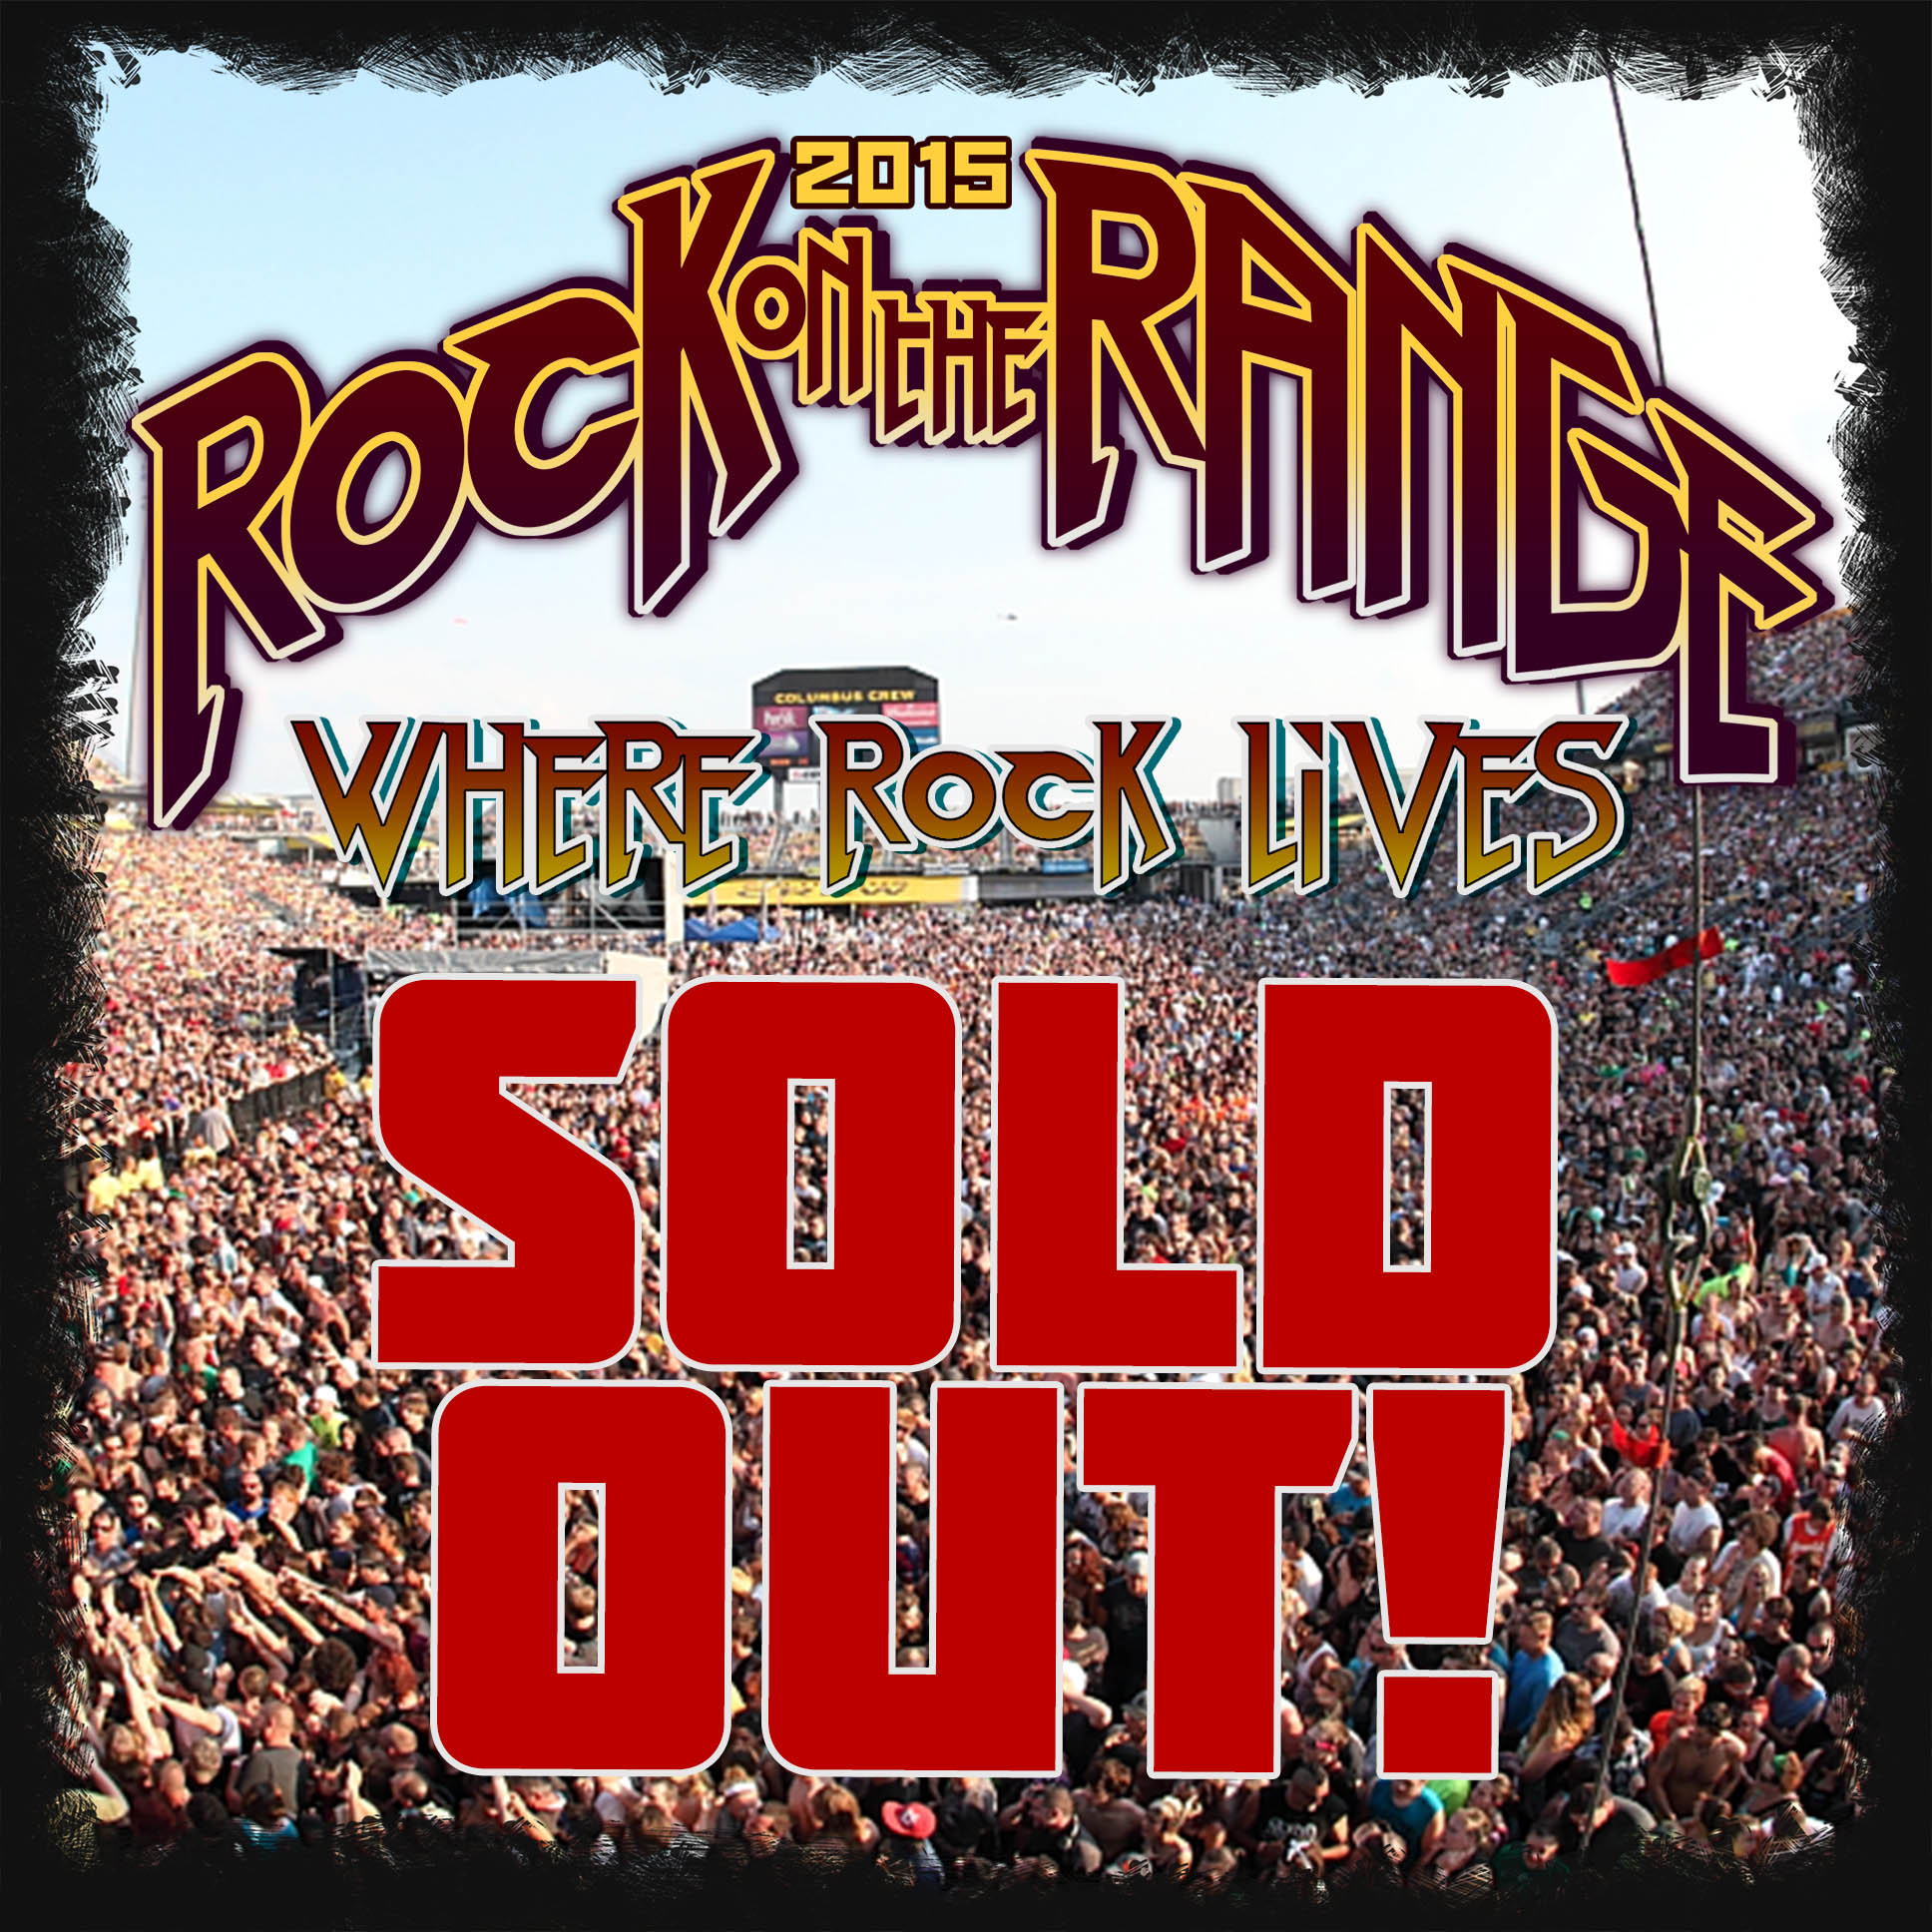 Rock on the Range 2016 Set Times Announced